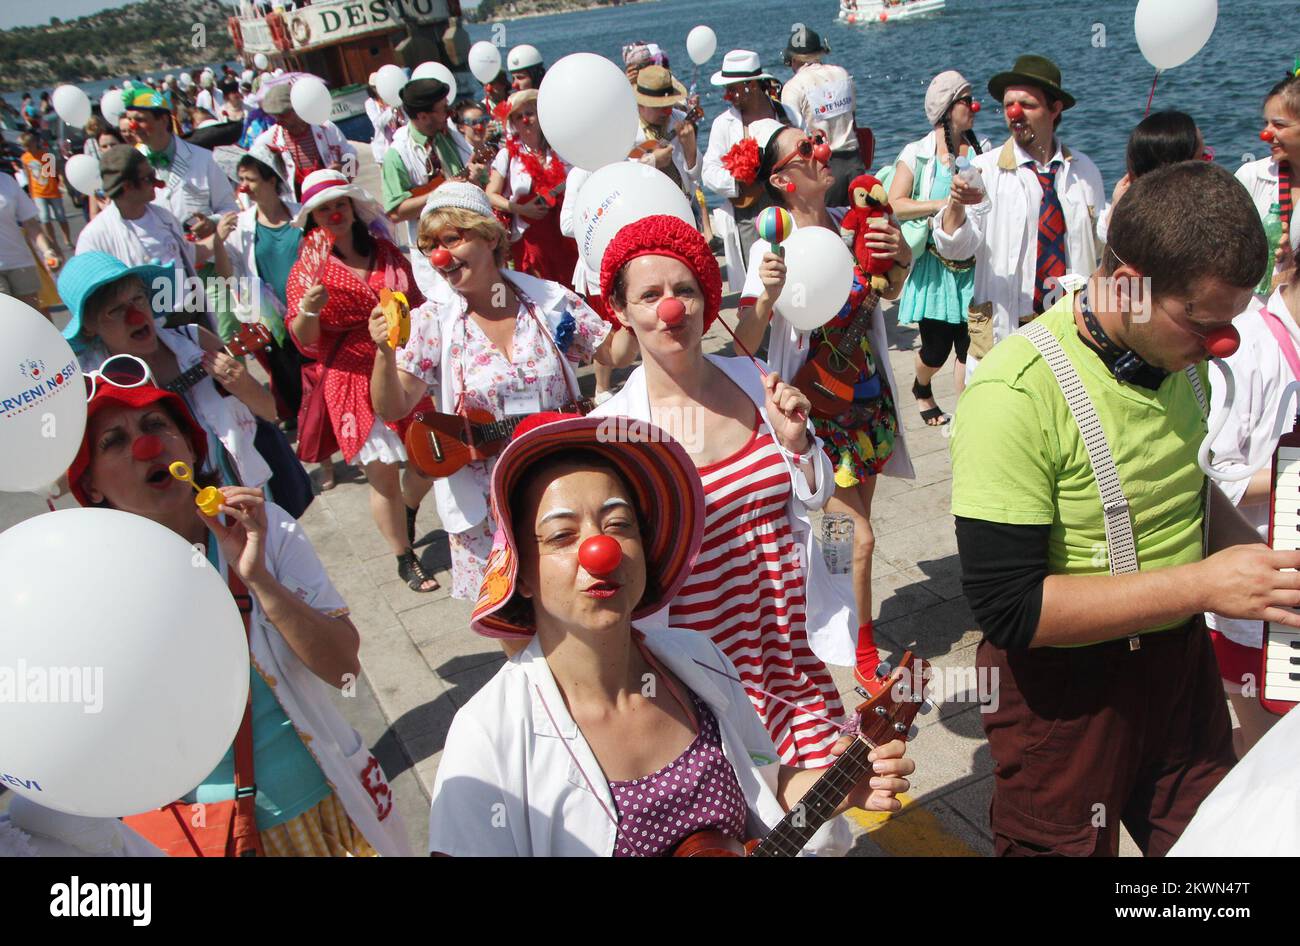 21.06.2013: Sibenik, Croatia: International clown doctor organisation Red noses came to Adriatic coast. They brought music, magic, and lots of fantasy and laughter to children, their parents, citizens and tourists.  Photo: Dusko Jaramaz/PIXSELL Stock Photo